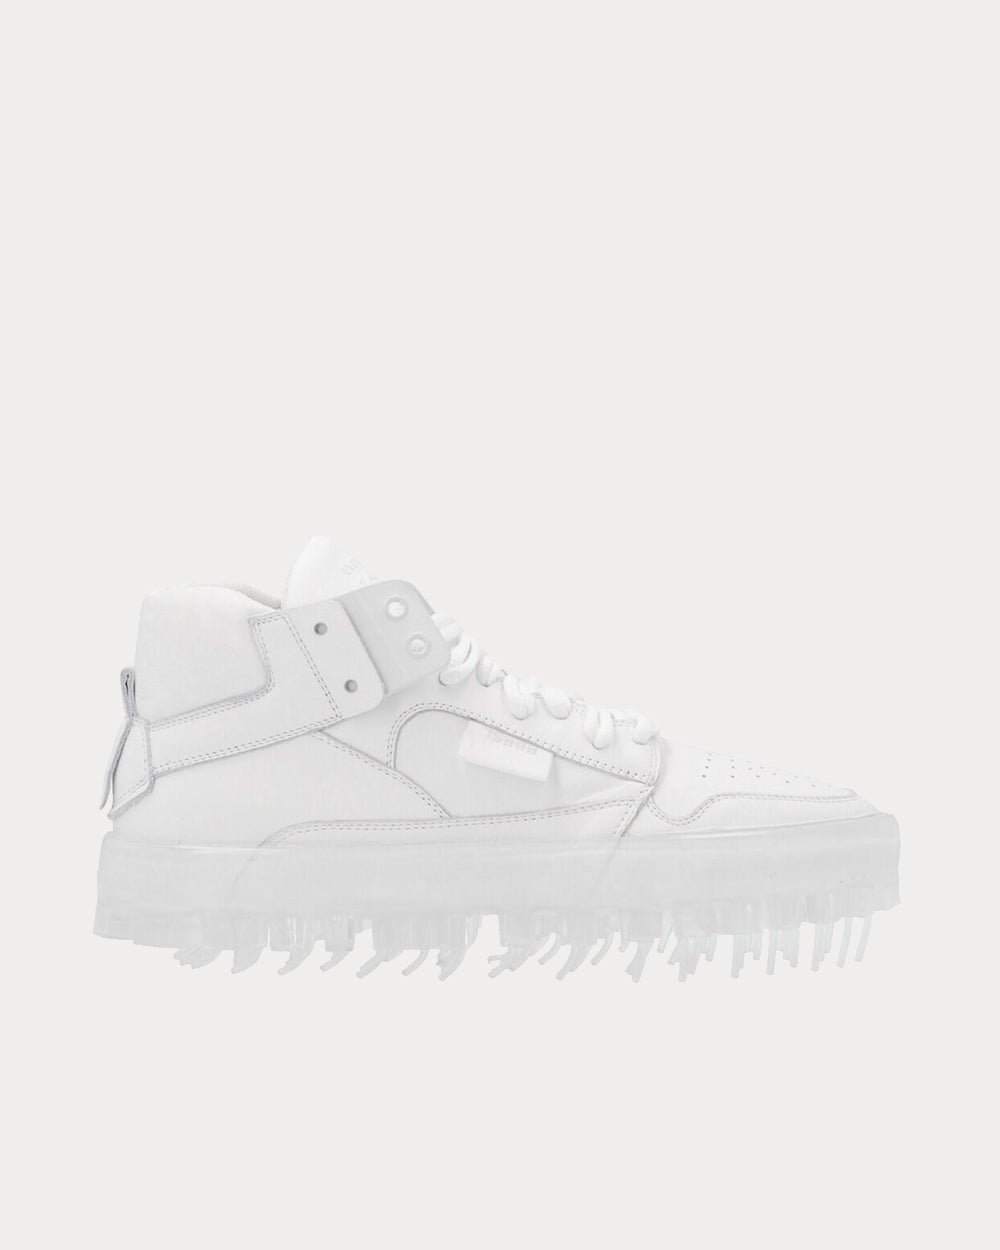 RBRSL - Bold White High Top Sneakers